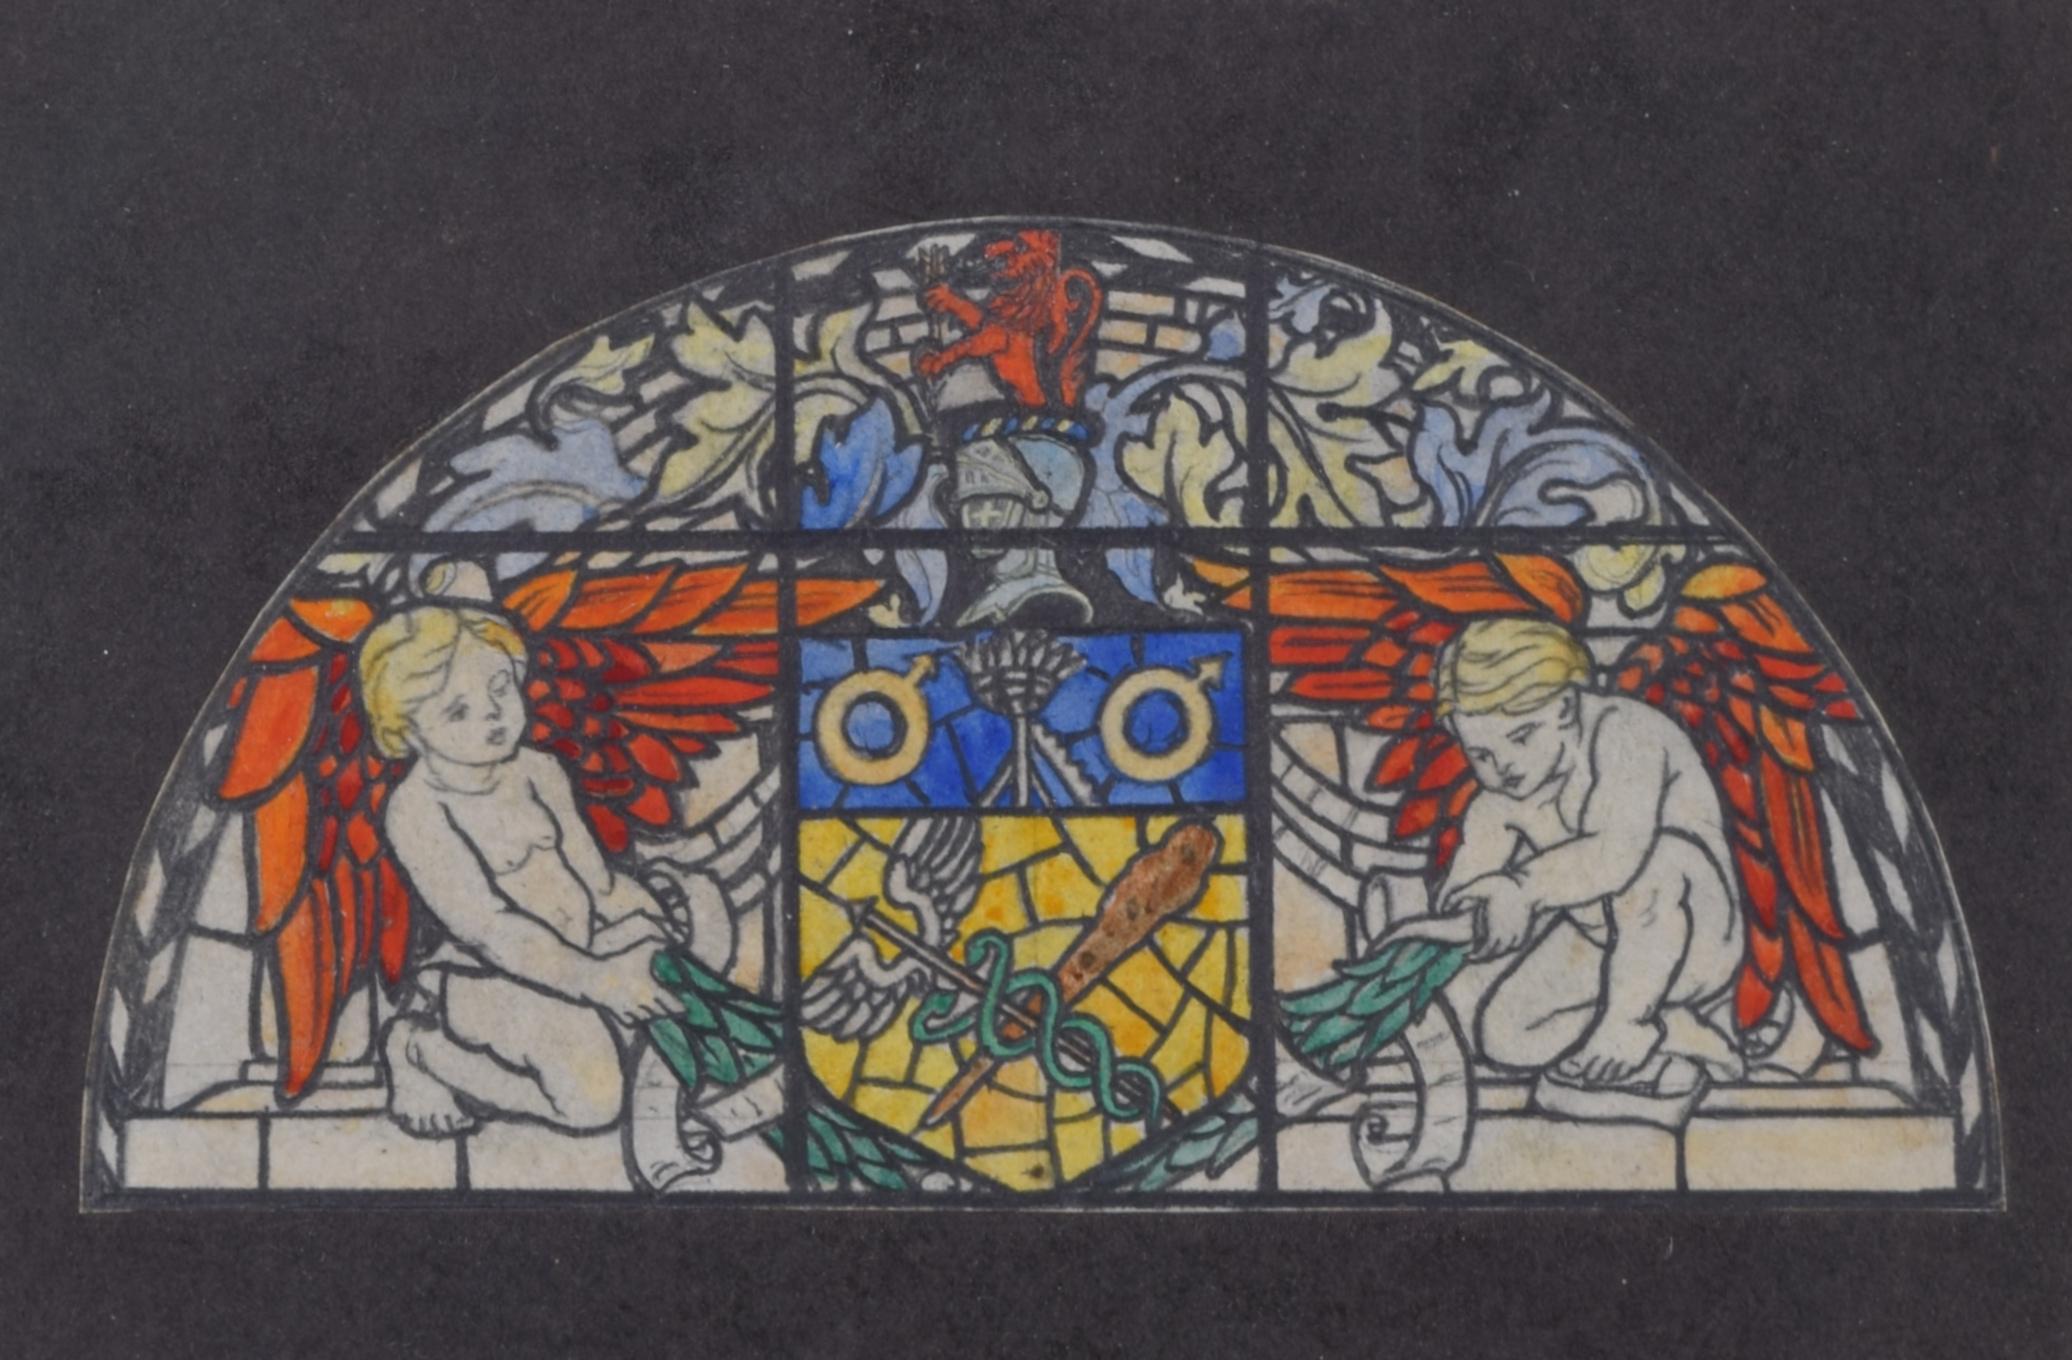 Search for, or send us a message us about, our other stained glass designs. We have an extensive collection of TW Camm and Florence Camm designs from the Camm studio sale, and are always happy to discuss them further.

Thomas William Camm (1839 –